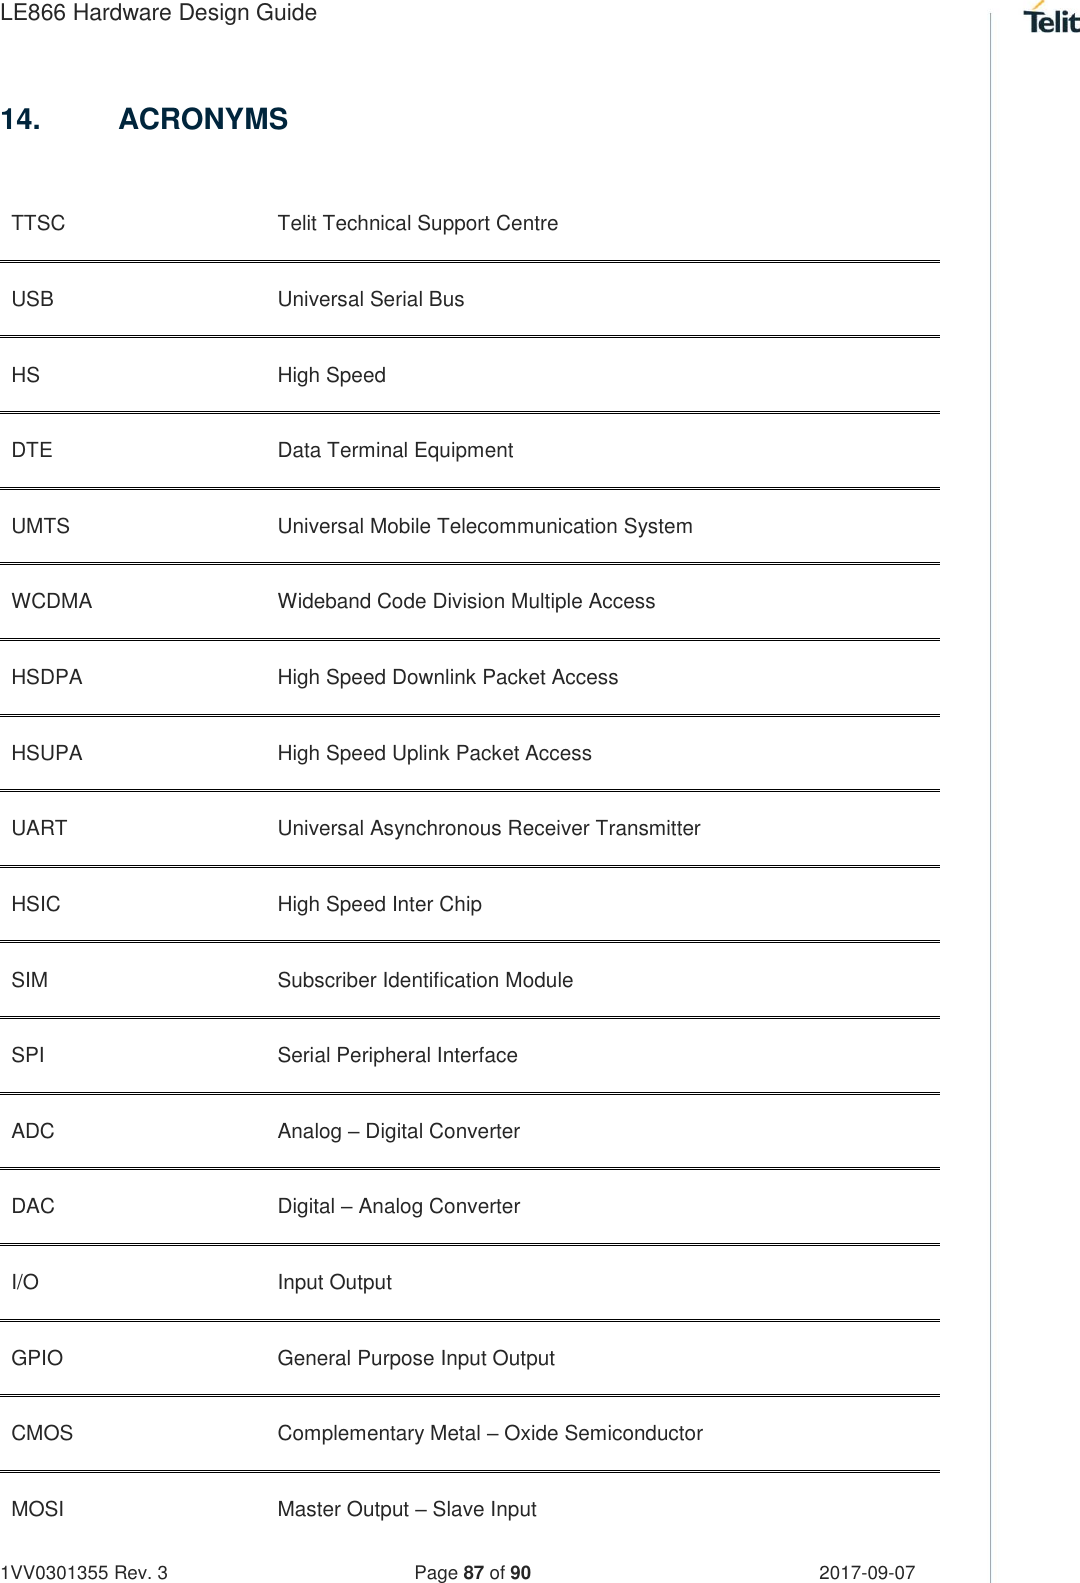 LE866 Hardware Design Guide   1VV0301355 Rev. 3   Page 87 of 90 2017-09-07  14.  ACRONYMS  TTSC Telit Technical Support Centre USB Universal Serial Bus HS High Speed DTE Data Terminal Equipment UMTS Universal Mobile Telecommunication System WCDMA Wideband Code Division Multiple Access HSDPA High Speed Downlink Packet Access HSUPA High Speed Uplink Packet Access UART Universal Asynchronous Receiver Transmitter HSIC High Speed Inter Chip SIM Subscriber Identification Module SPI Serial Peripheral Interface ADC Analog – Digital Converter DAC Digital – Analog Converter I/O Input Output GPIO General Purpose Input Output CMOS Complementary Metal – Oxide Semiconductor MOSI Master Output – Slave Input 